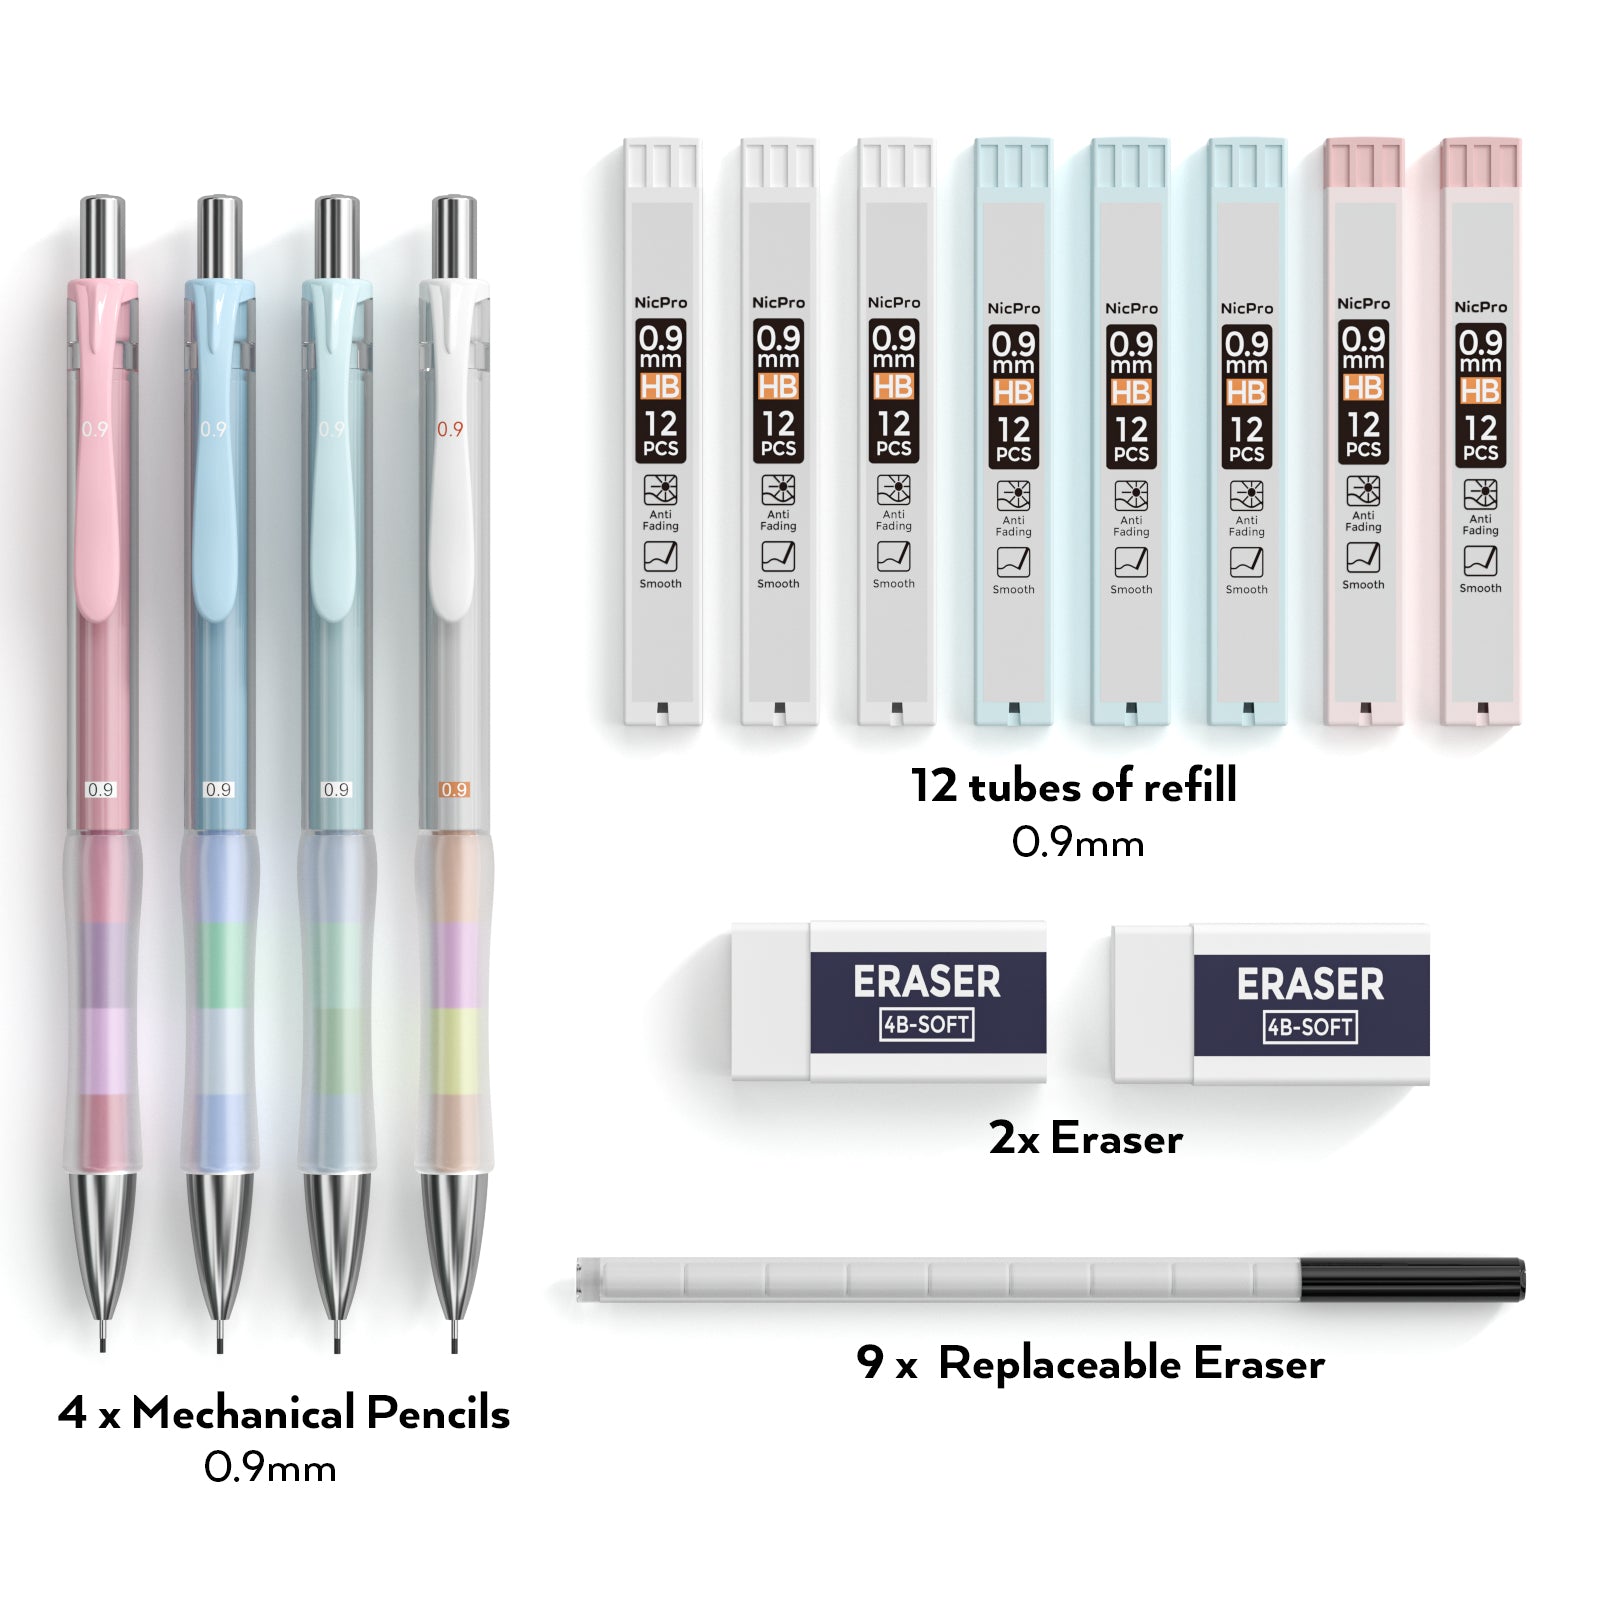 Nicpro 4 PCS 0.9 mm Mechanical Pencil Set With Storage Case, Pastel Drafting Pencil For Student School Writing, Sketching Drawing, With HB #2 Lead Refills Erasers